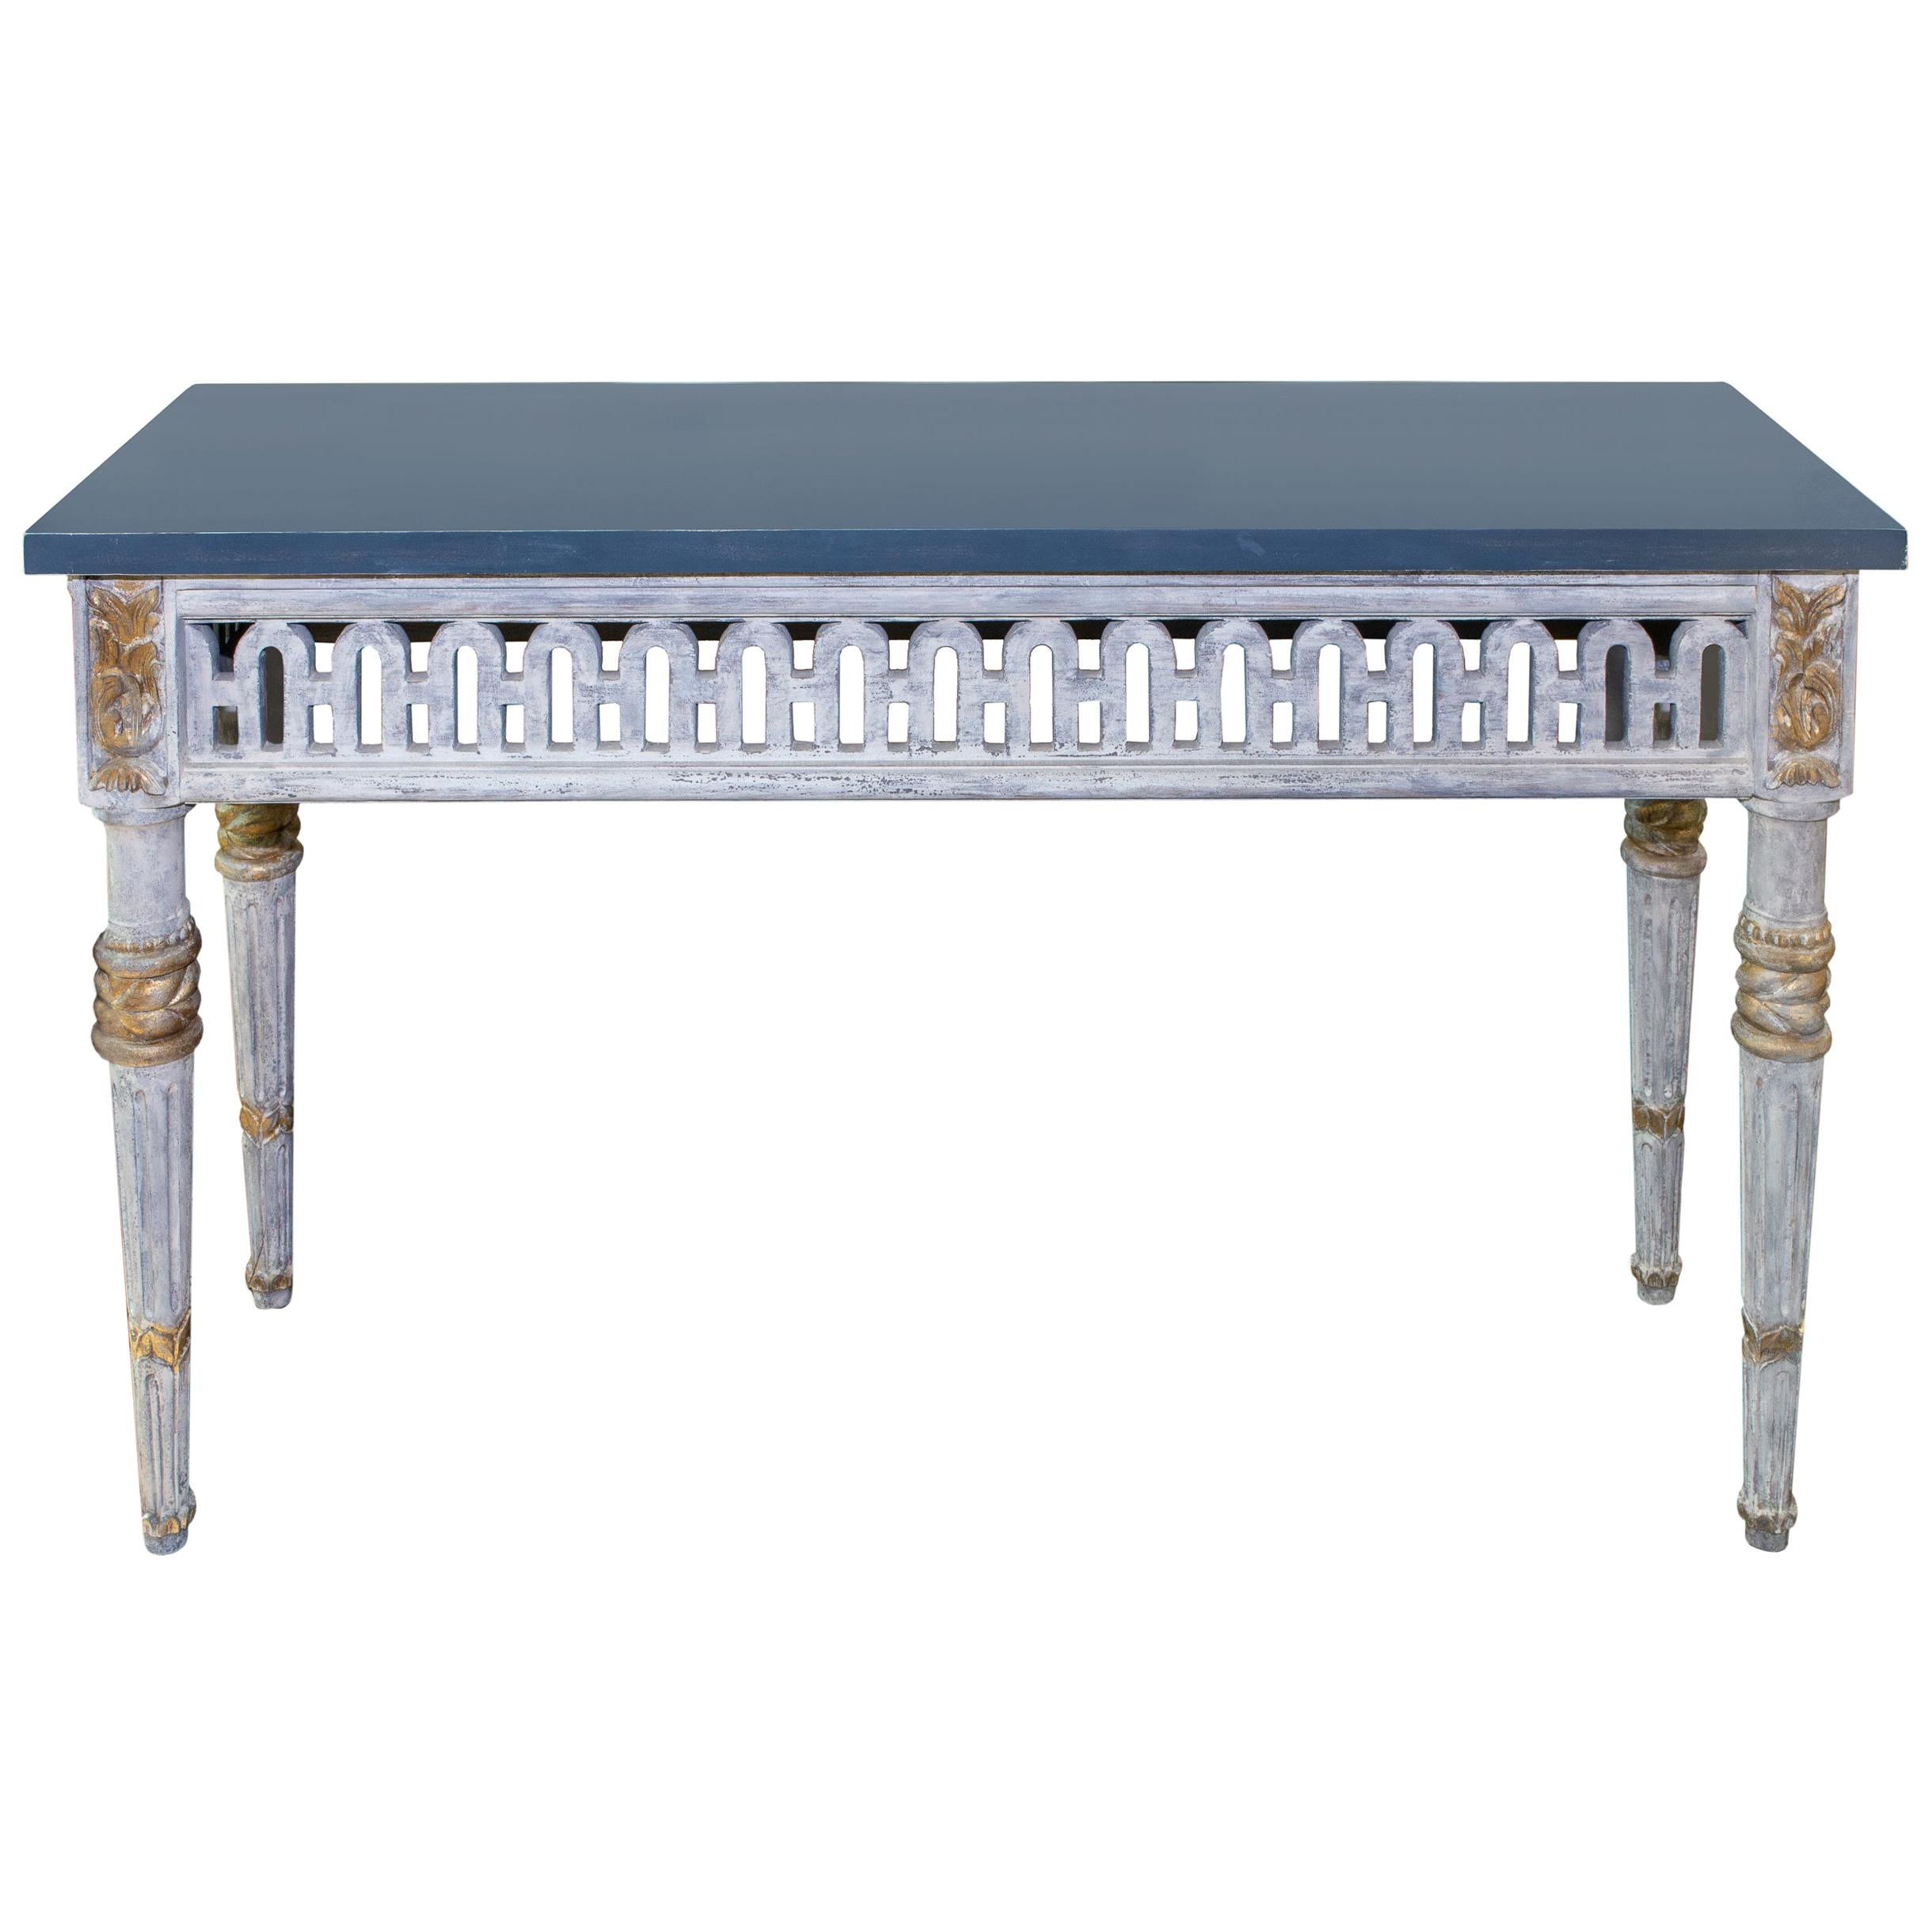 Italian Painted and Parcel Gilt Neoclassical Style Console